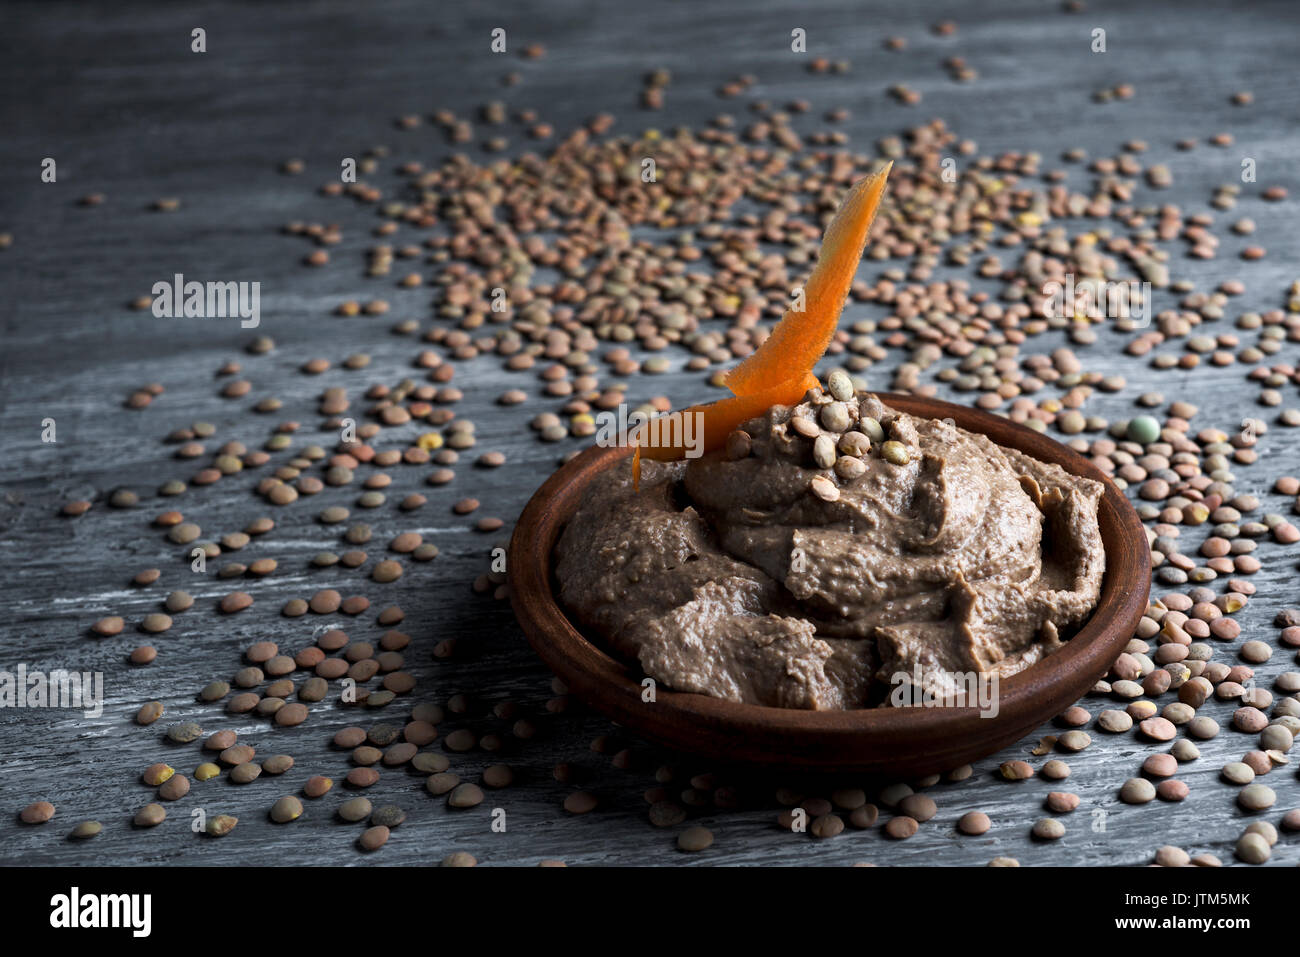 an earthenware bowl with appetizing lentil hummus on a rustic wooden table sprinkled with dried lentils Stock Photo